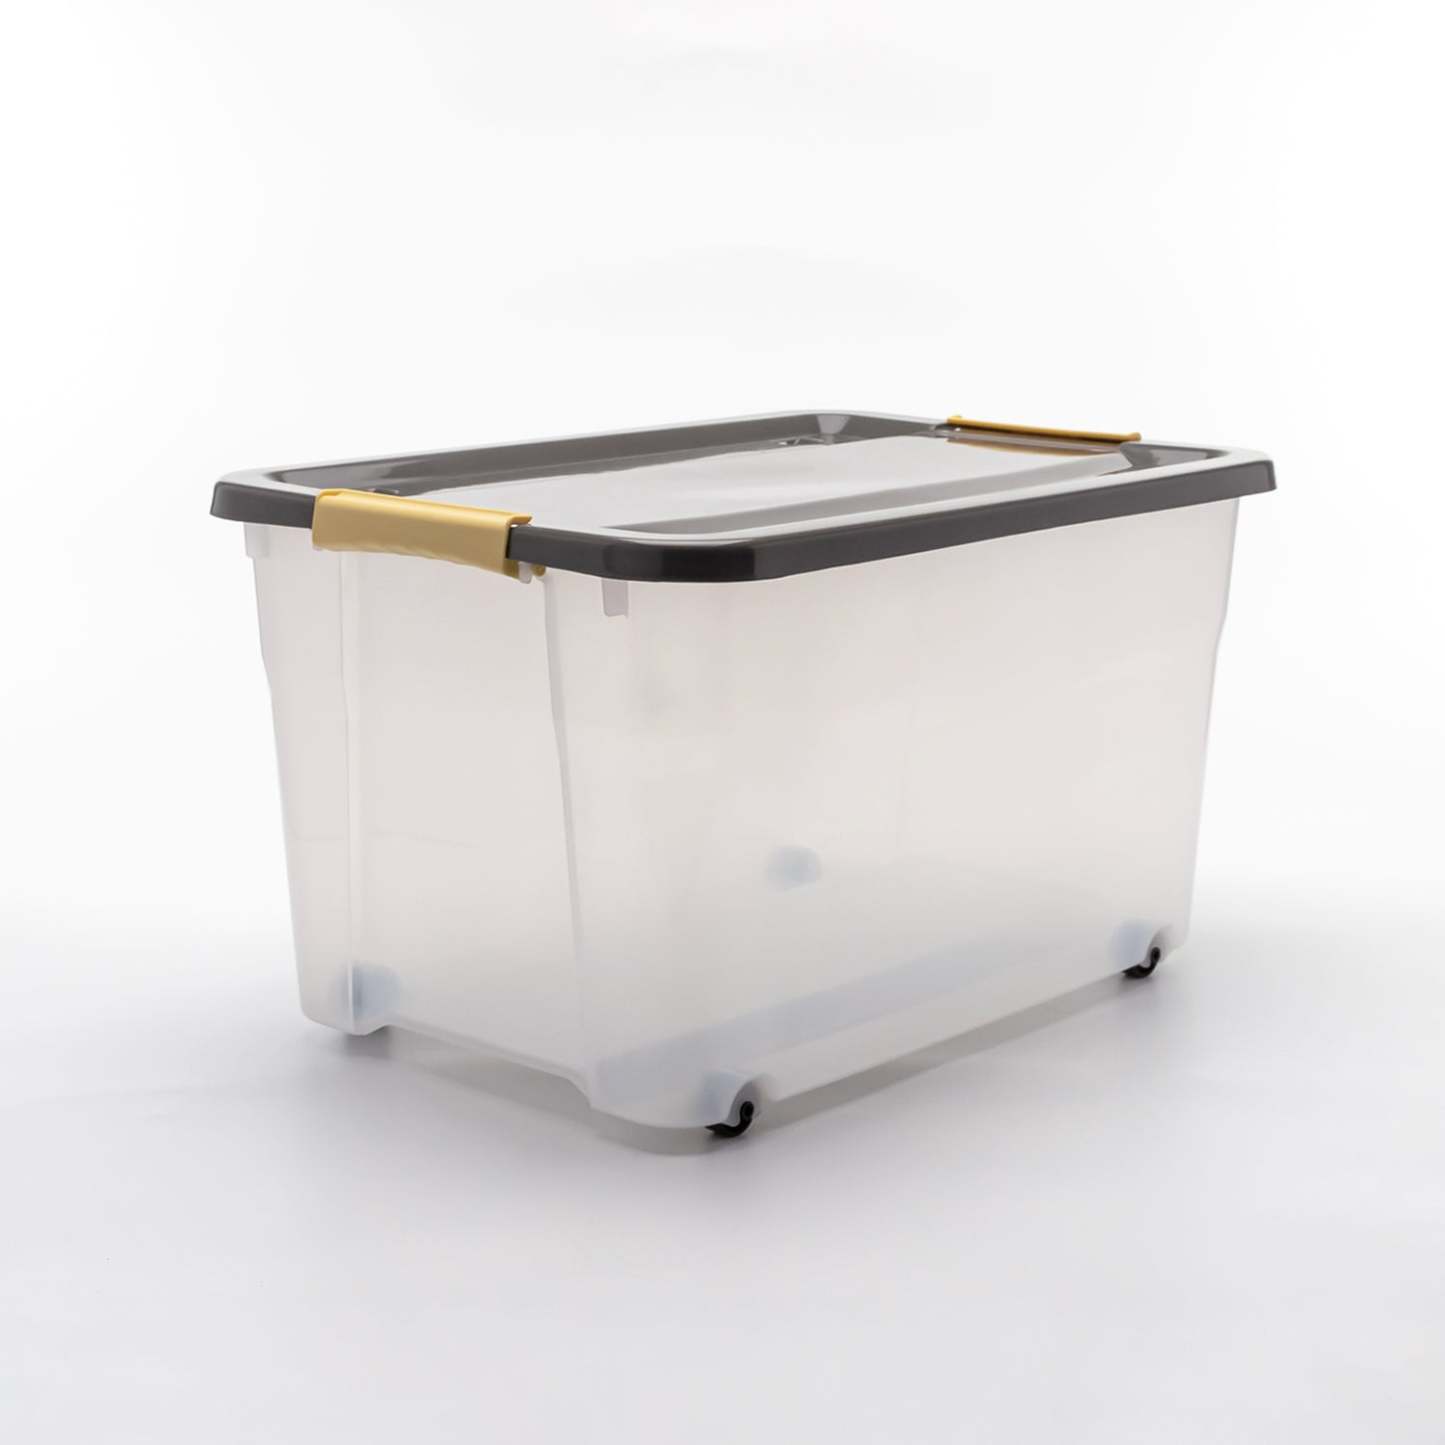 HOUZE - 'Rollie' Series 35L/55L Stackable Storage Box with Wheels (Blue/Grey)